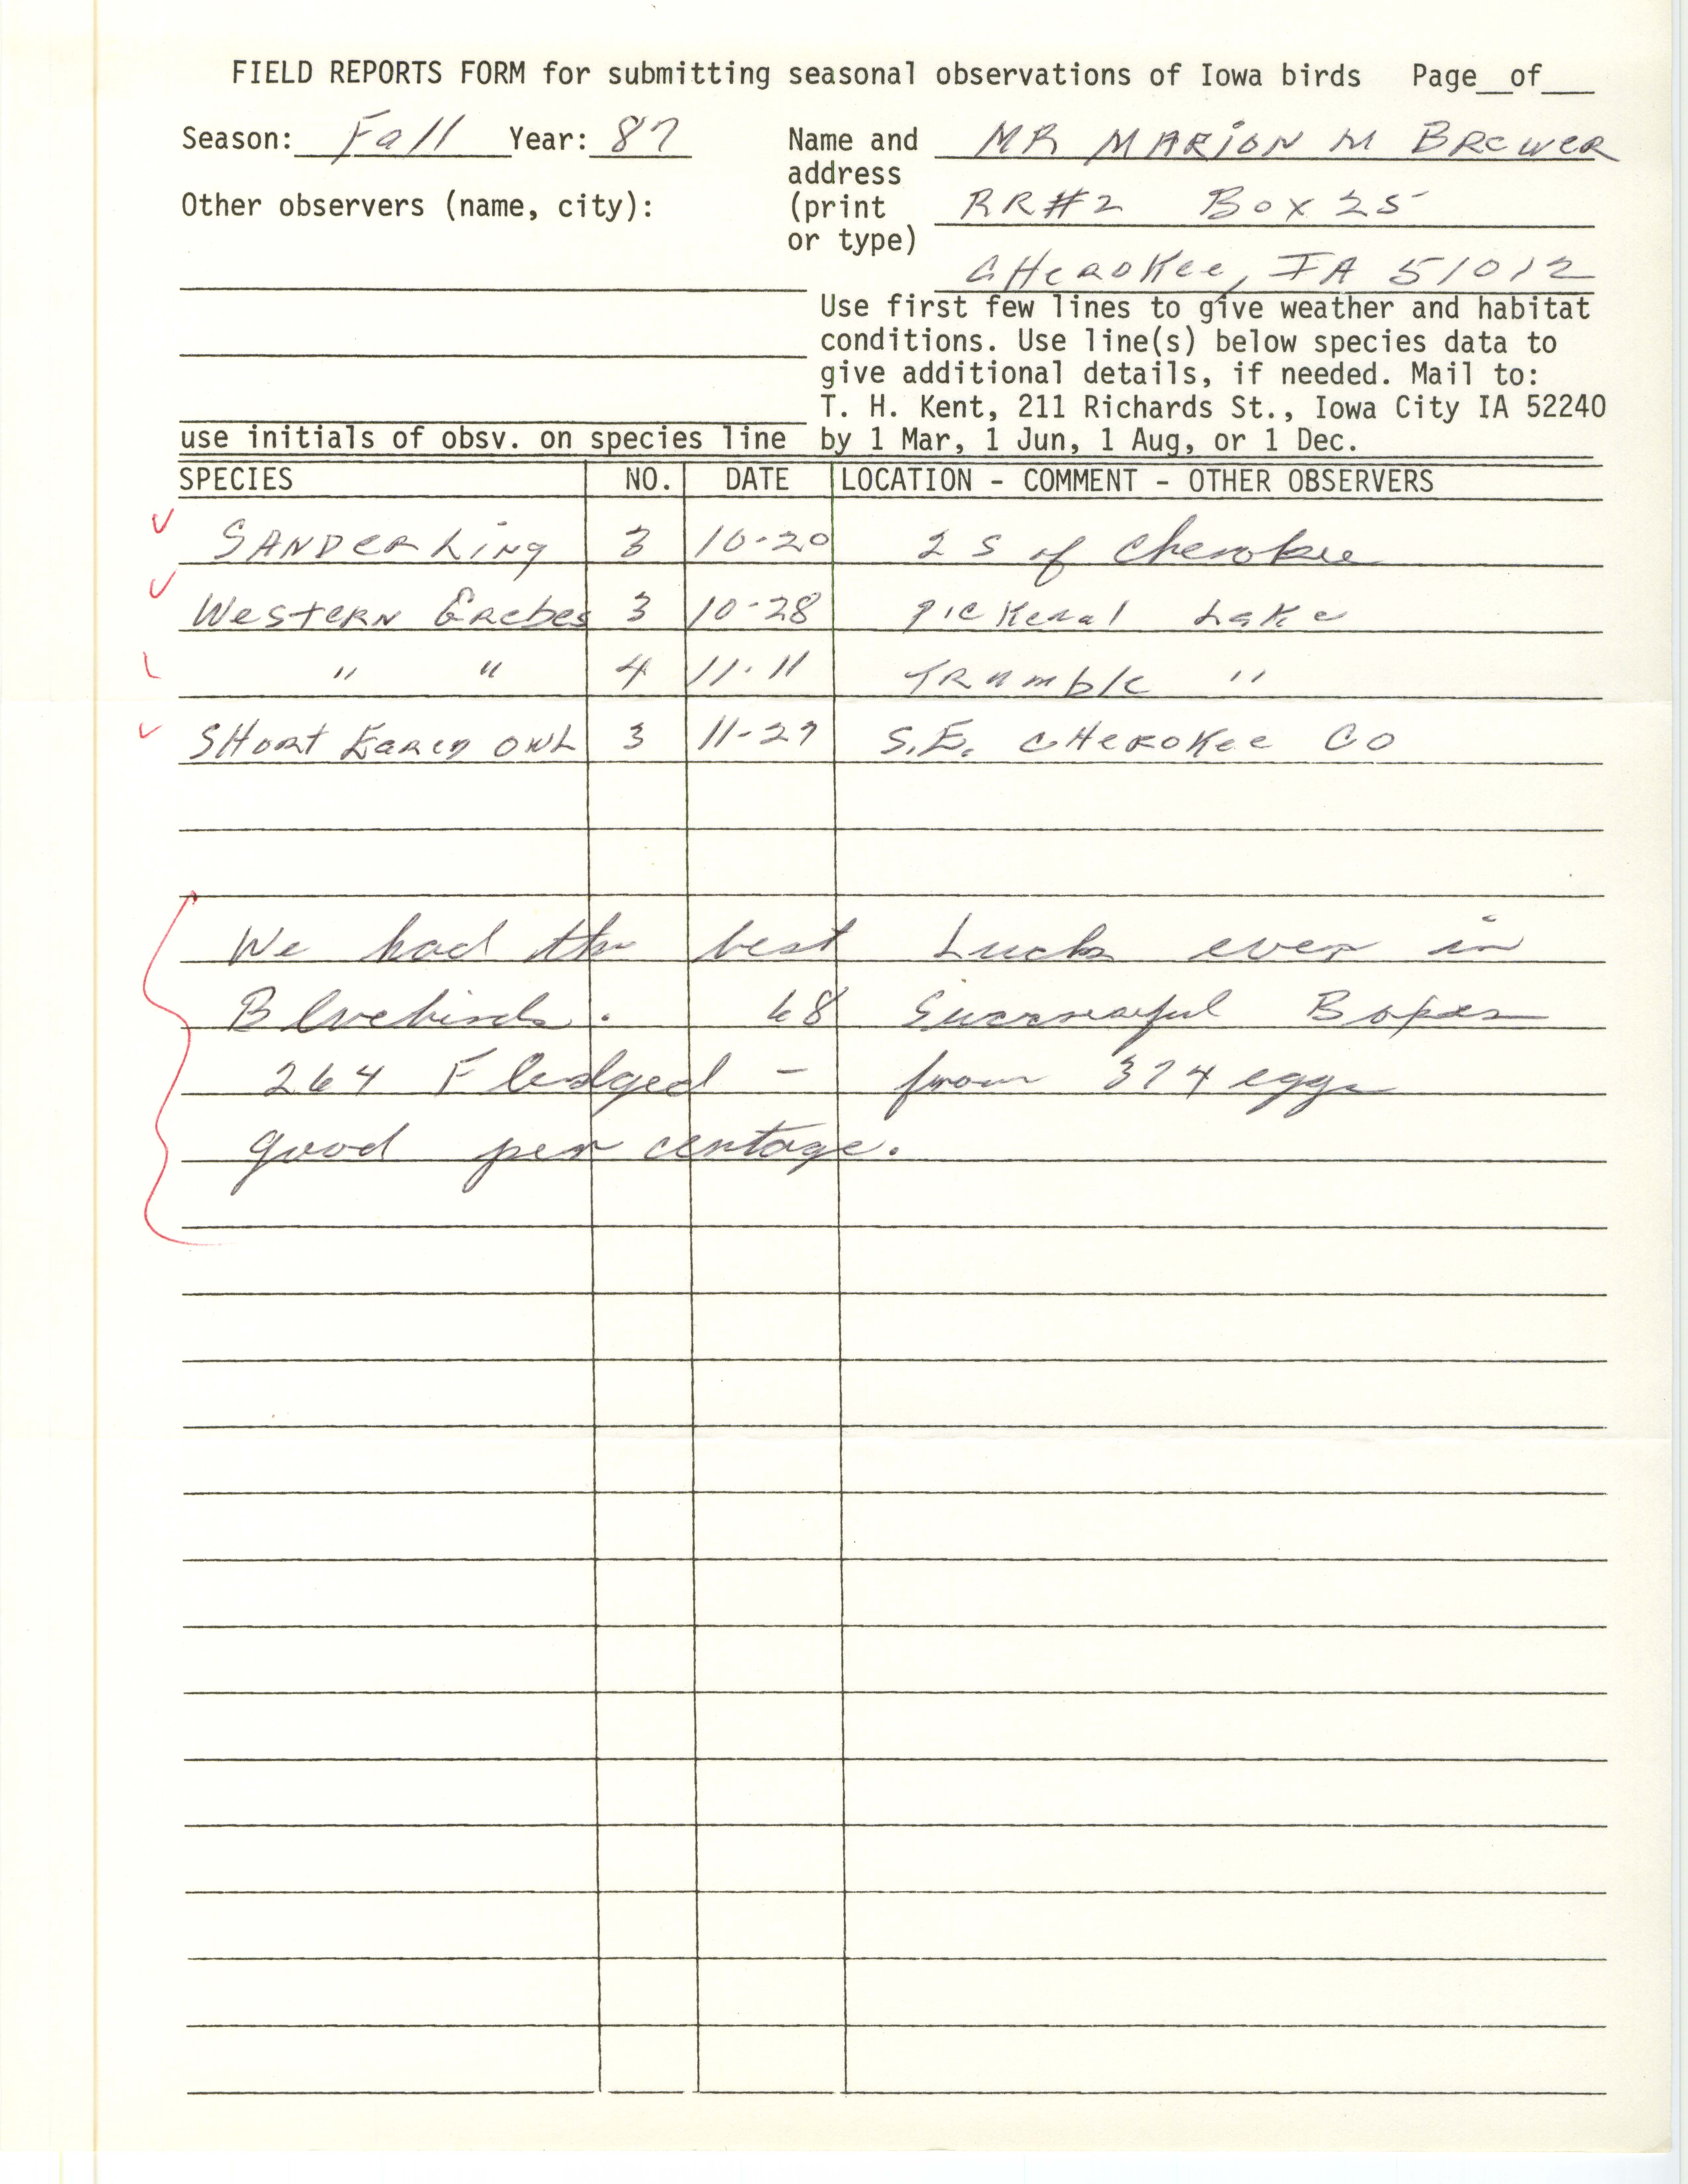 Field reports form for submitting seasonal observations of Iowa birds, Marion M. Brewer, fall 1987